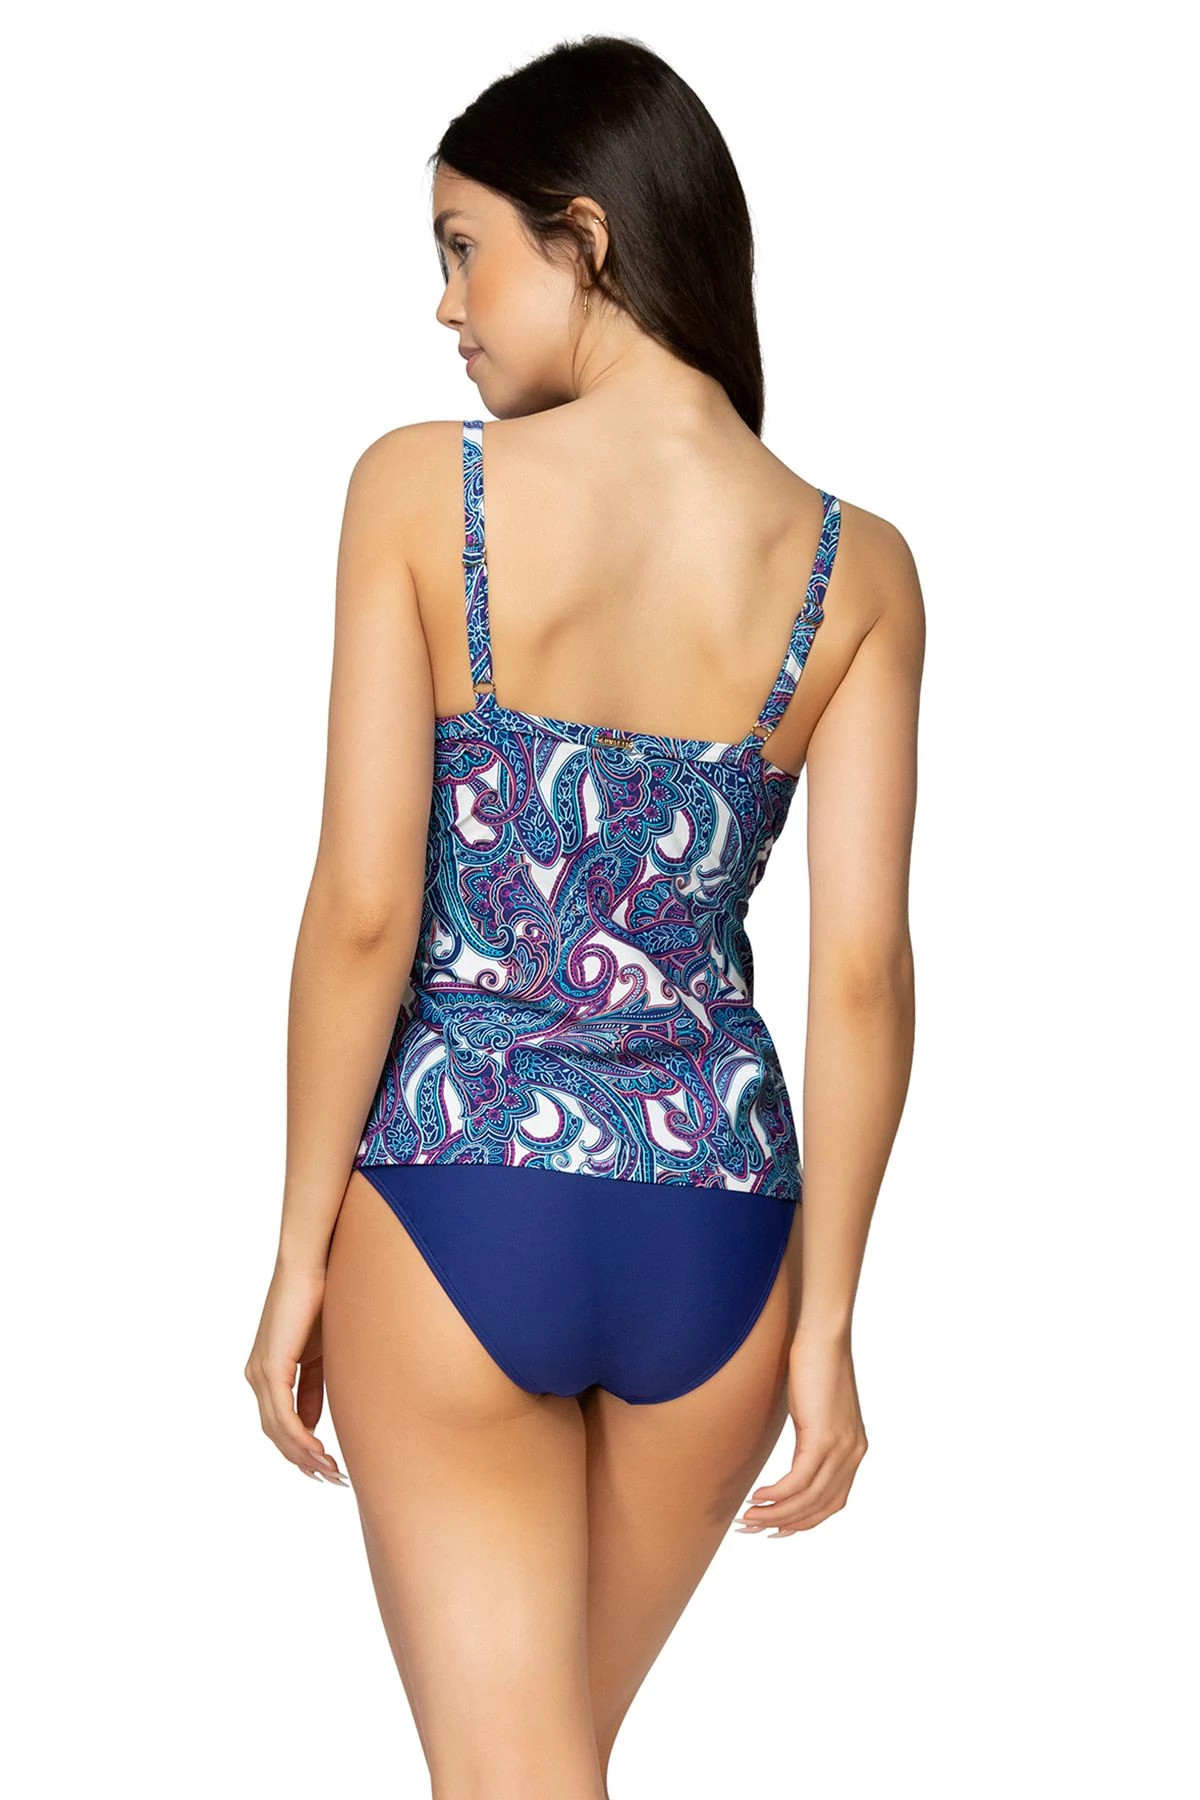 REGATTA PAISLEY Forever Underwire Bra Tankini Top (D+ Cup) image number 2